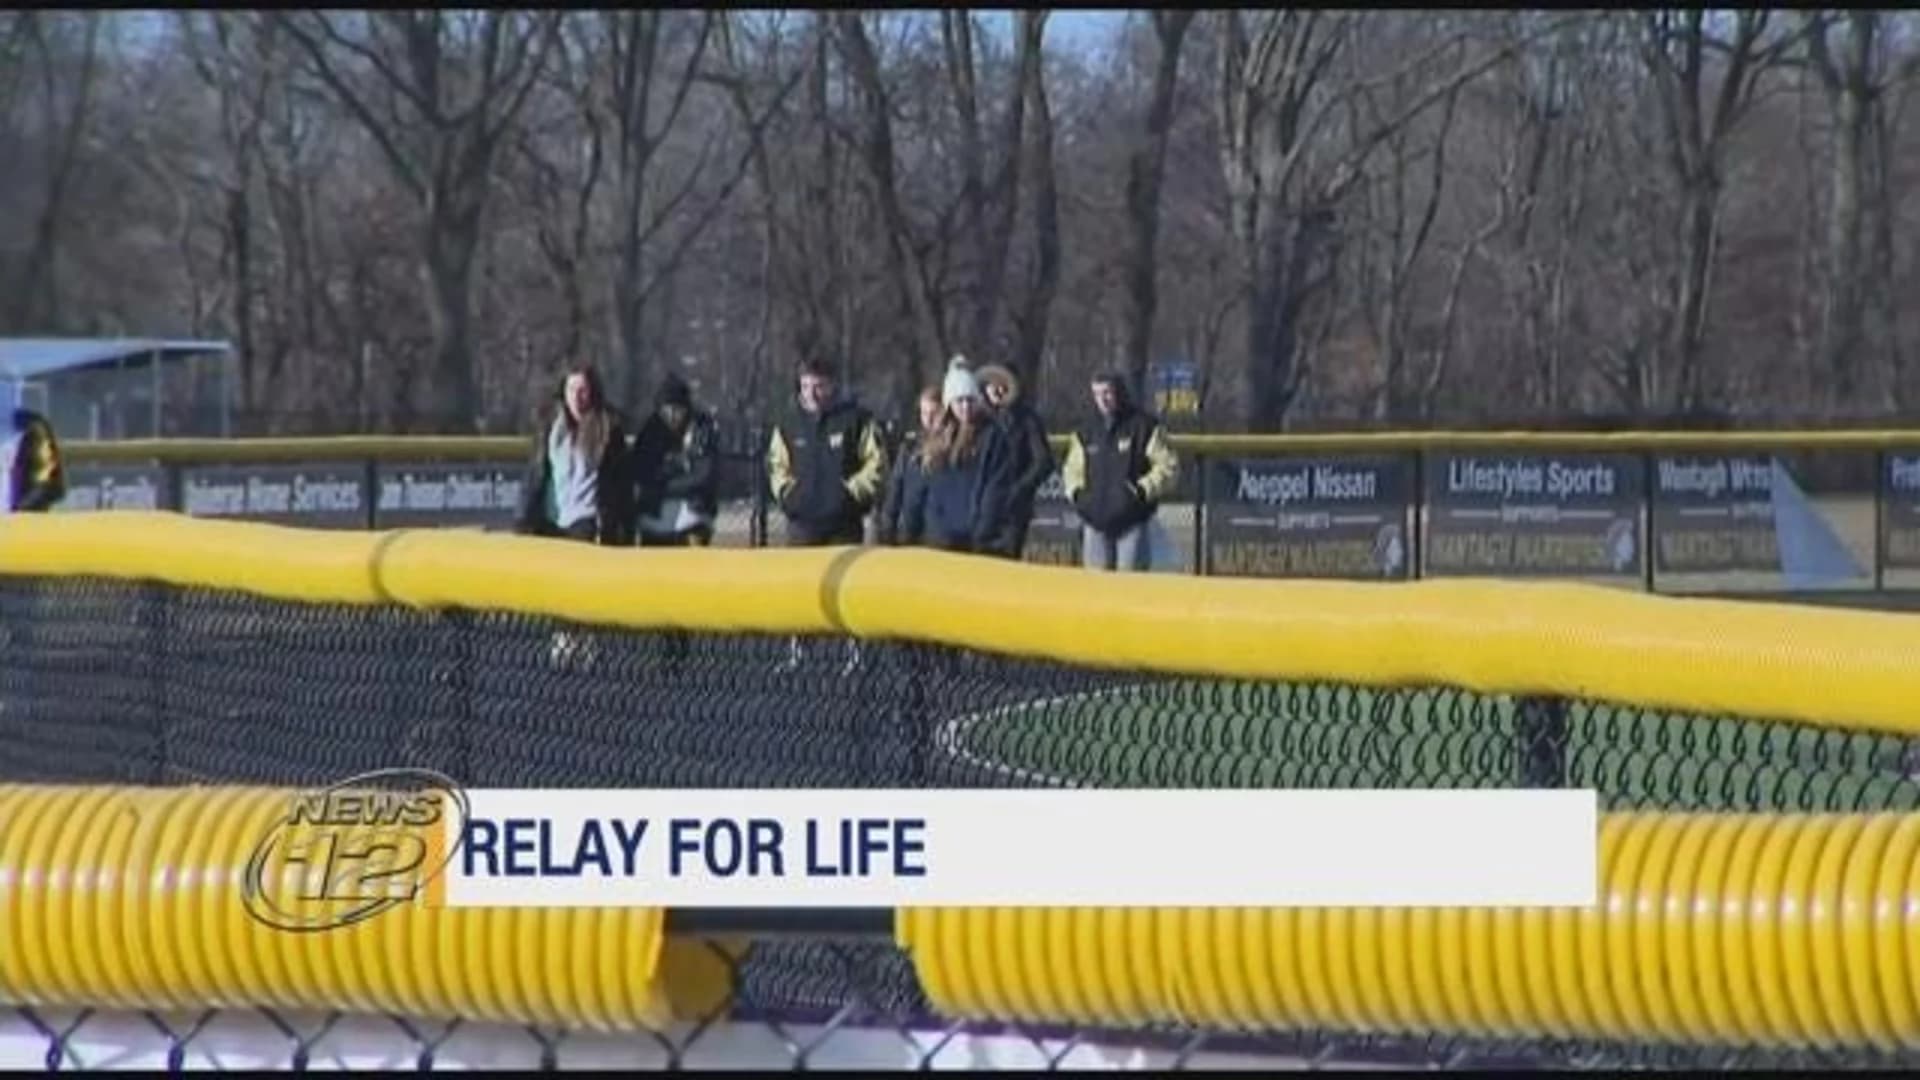 Dozens come together for Relay for Life in Wantagh